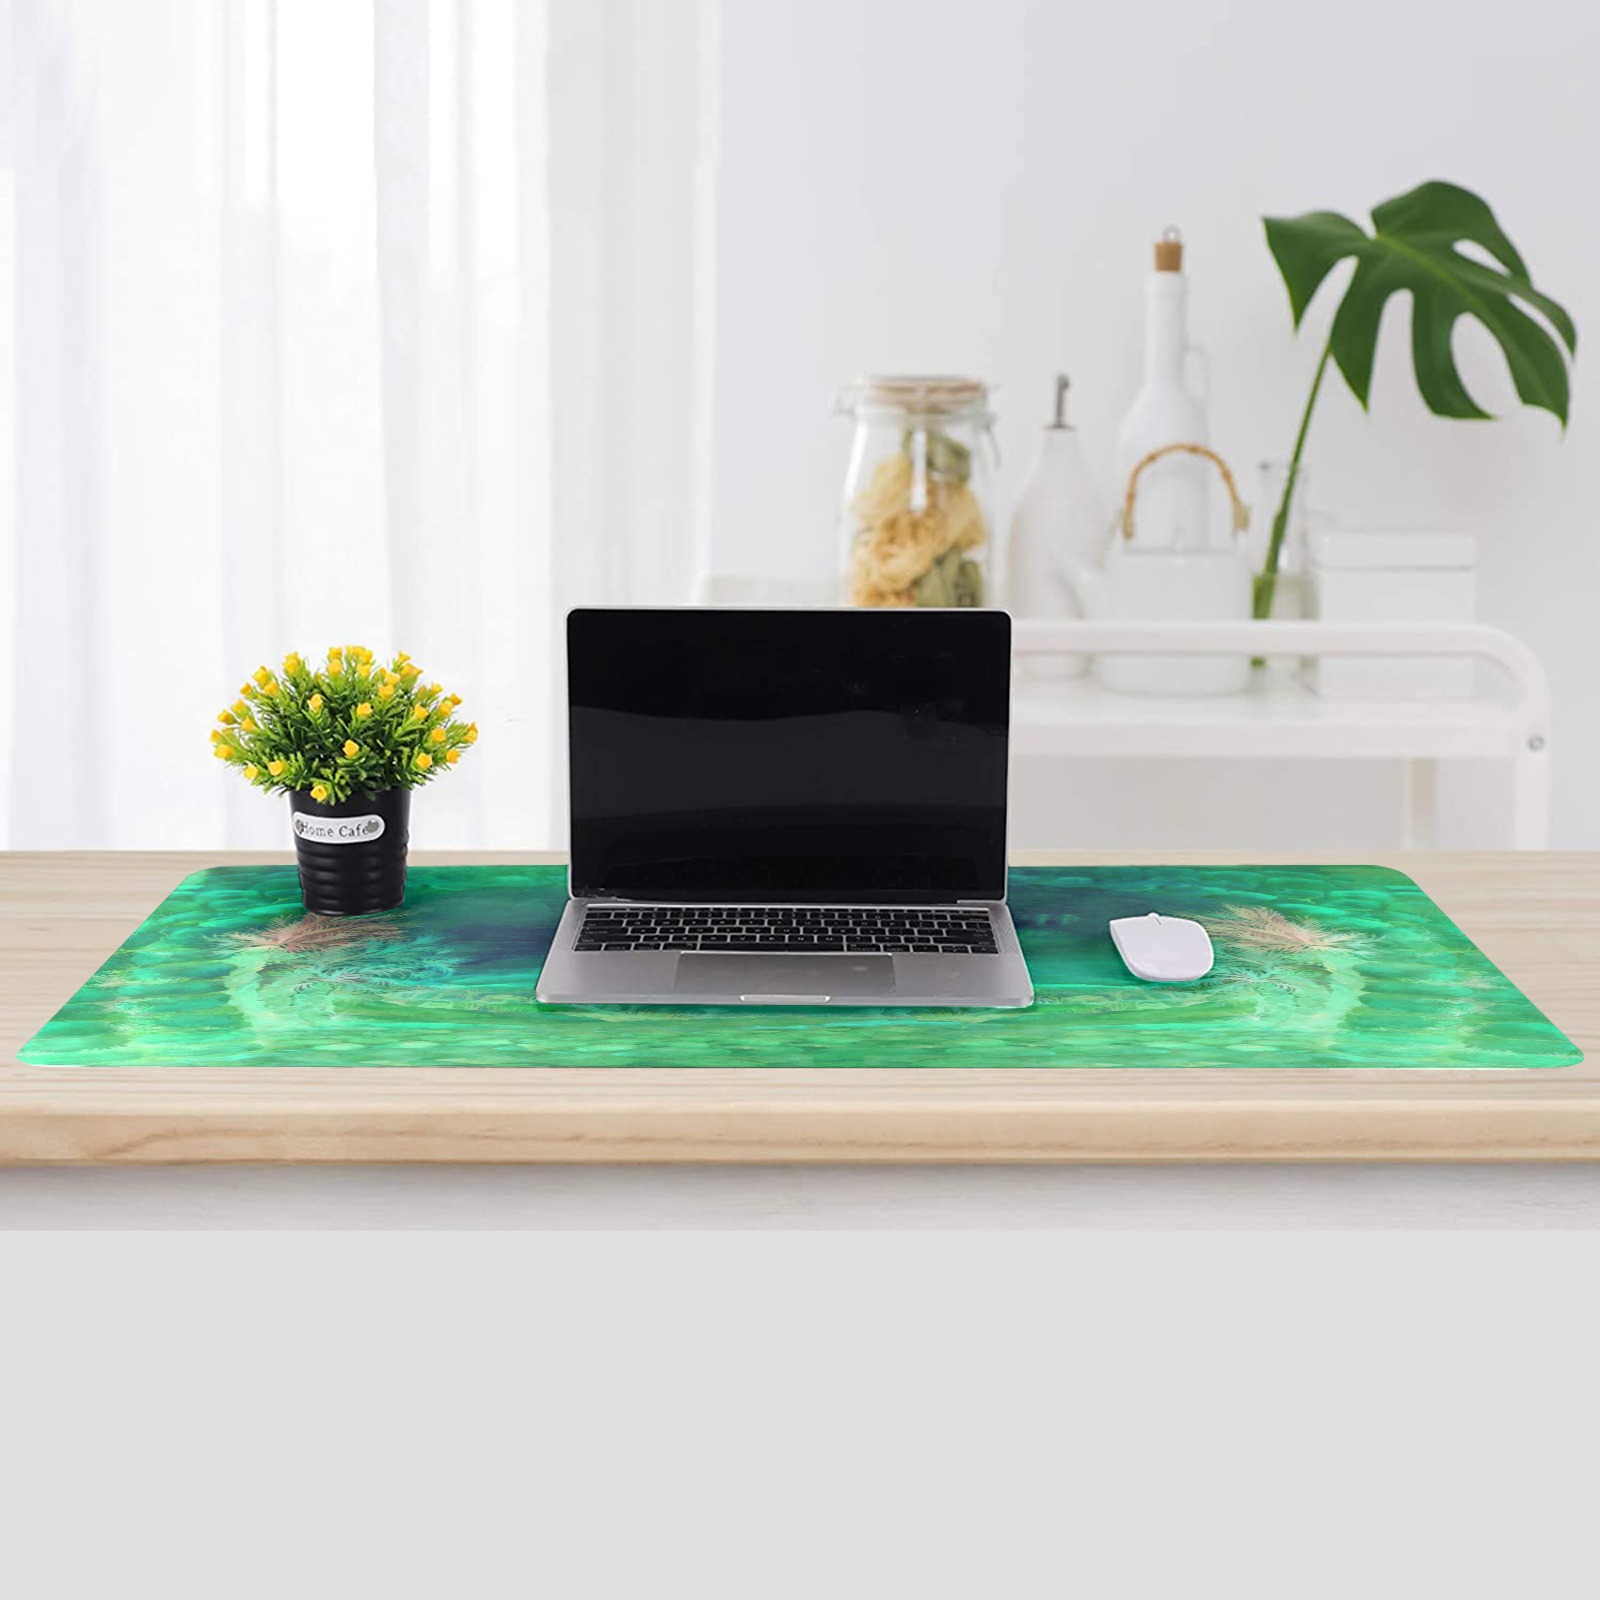 desert 4-35x16 inches Gaming Mousepad (35"x16")